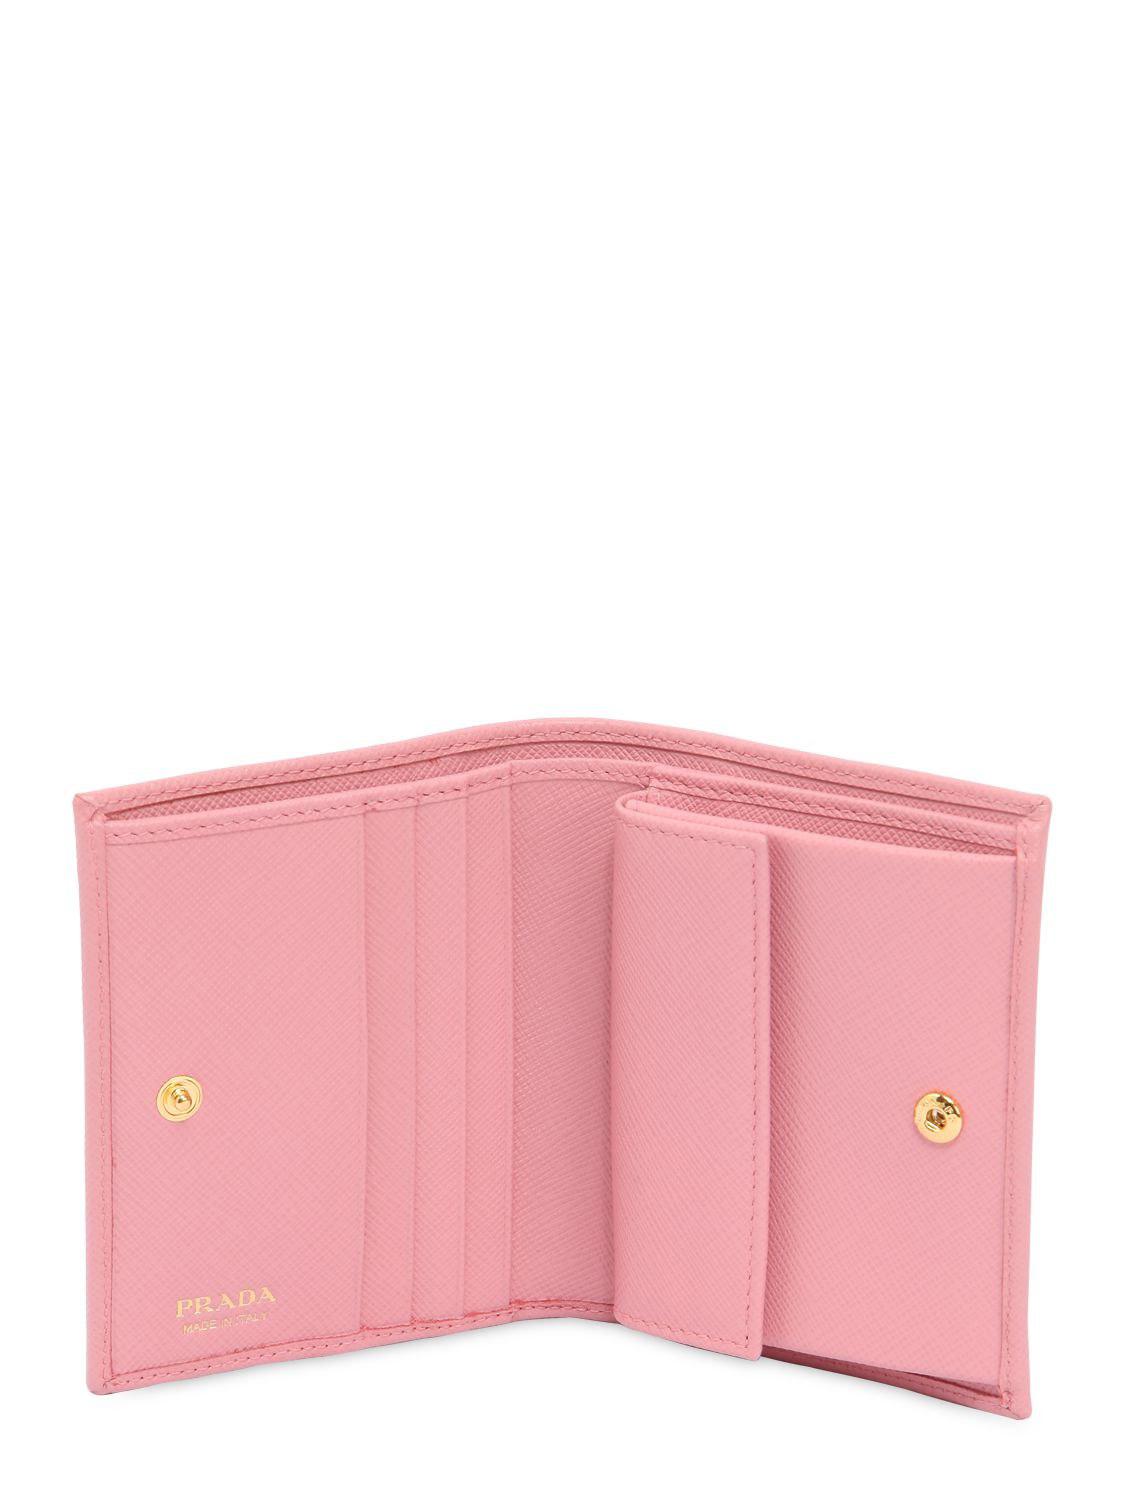 Prada Small Leather Wallet in Pink | Lyst